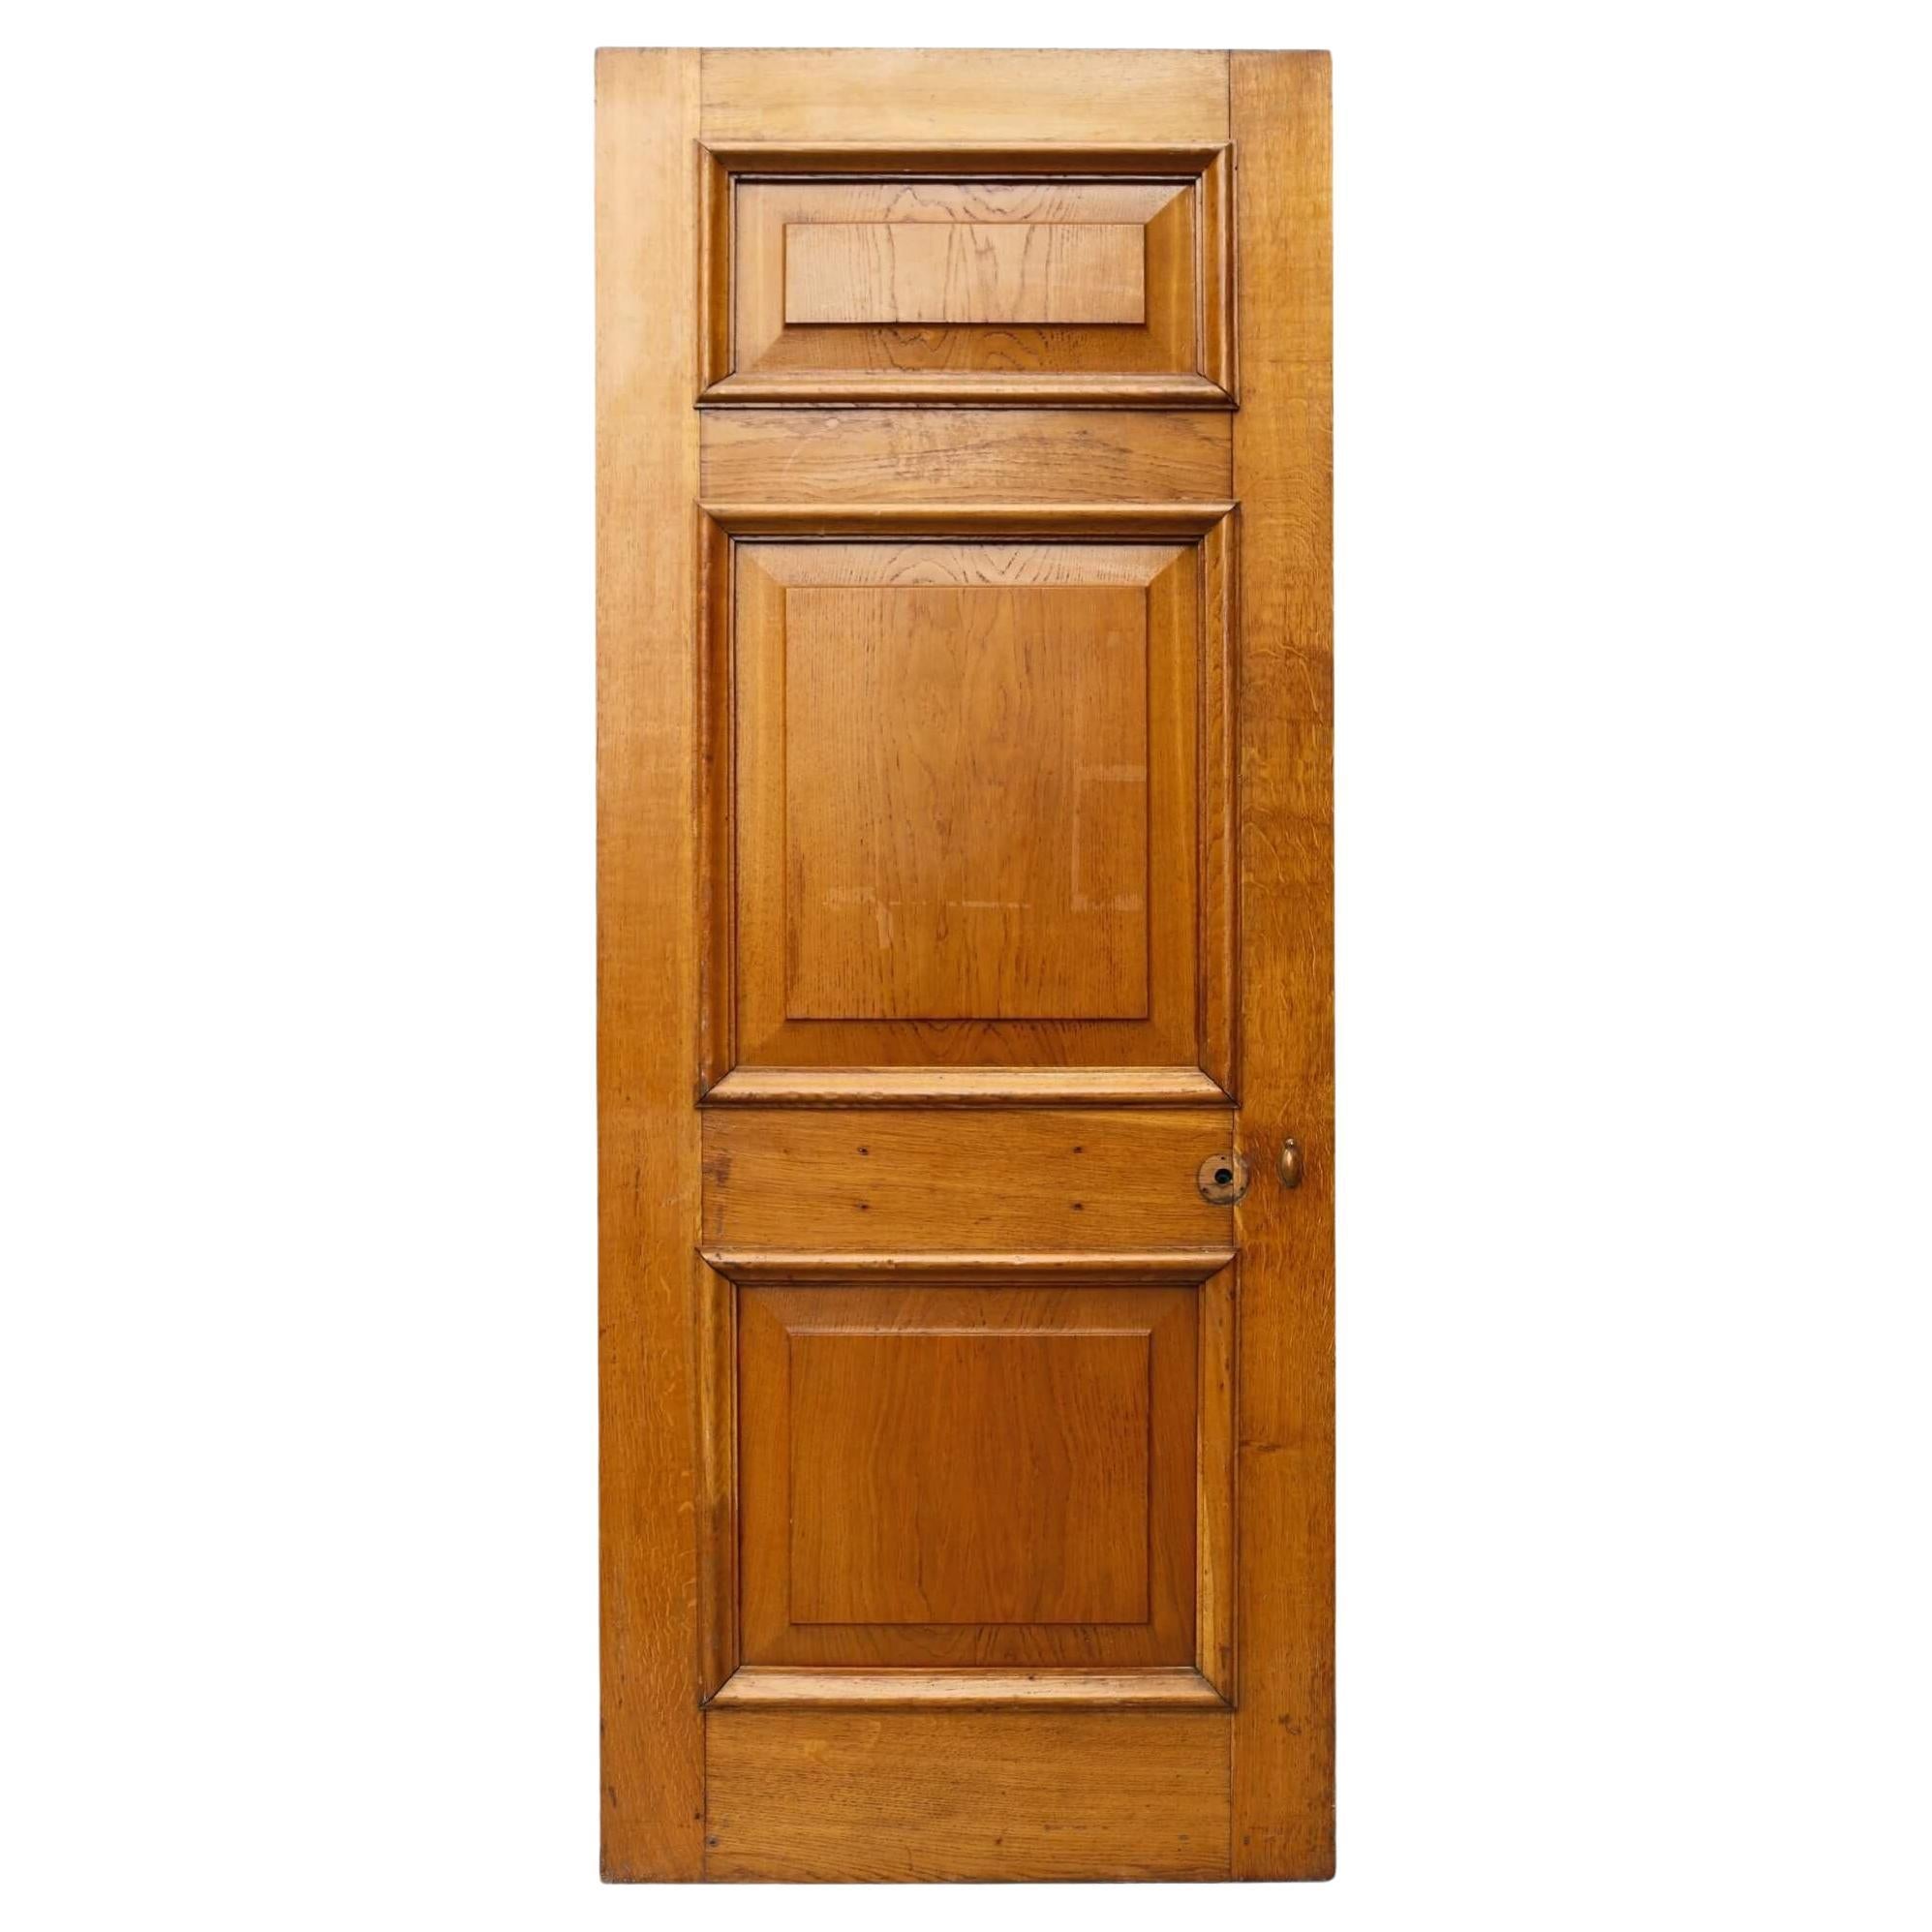 1920s Edwardian Style Oak Door with Frame & Architrave